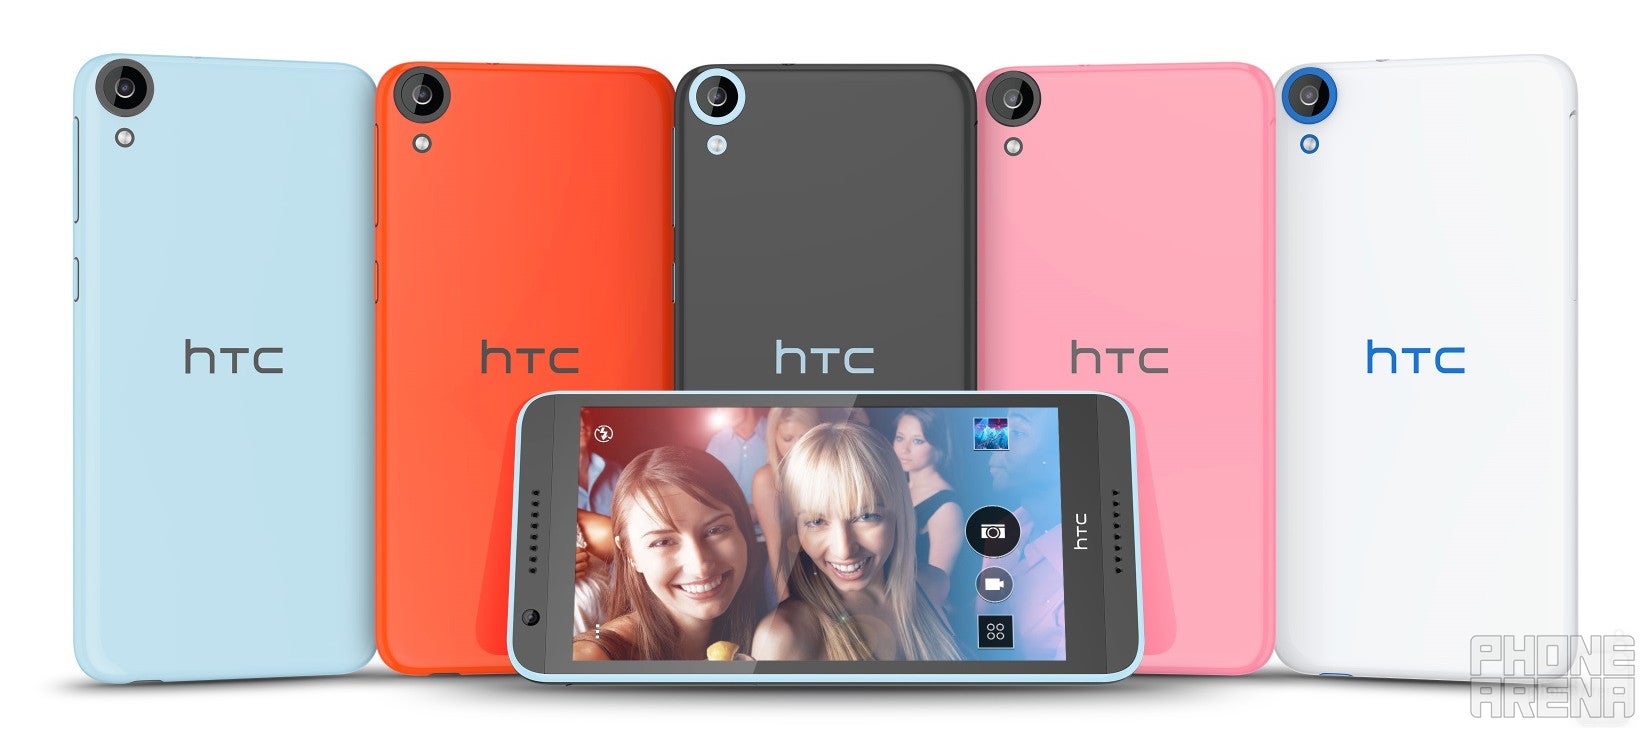 First benchmark results for the 64-bit Snapdragon 615-packing HTC Desire 820 are here